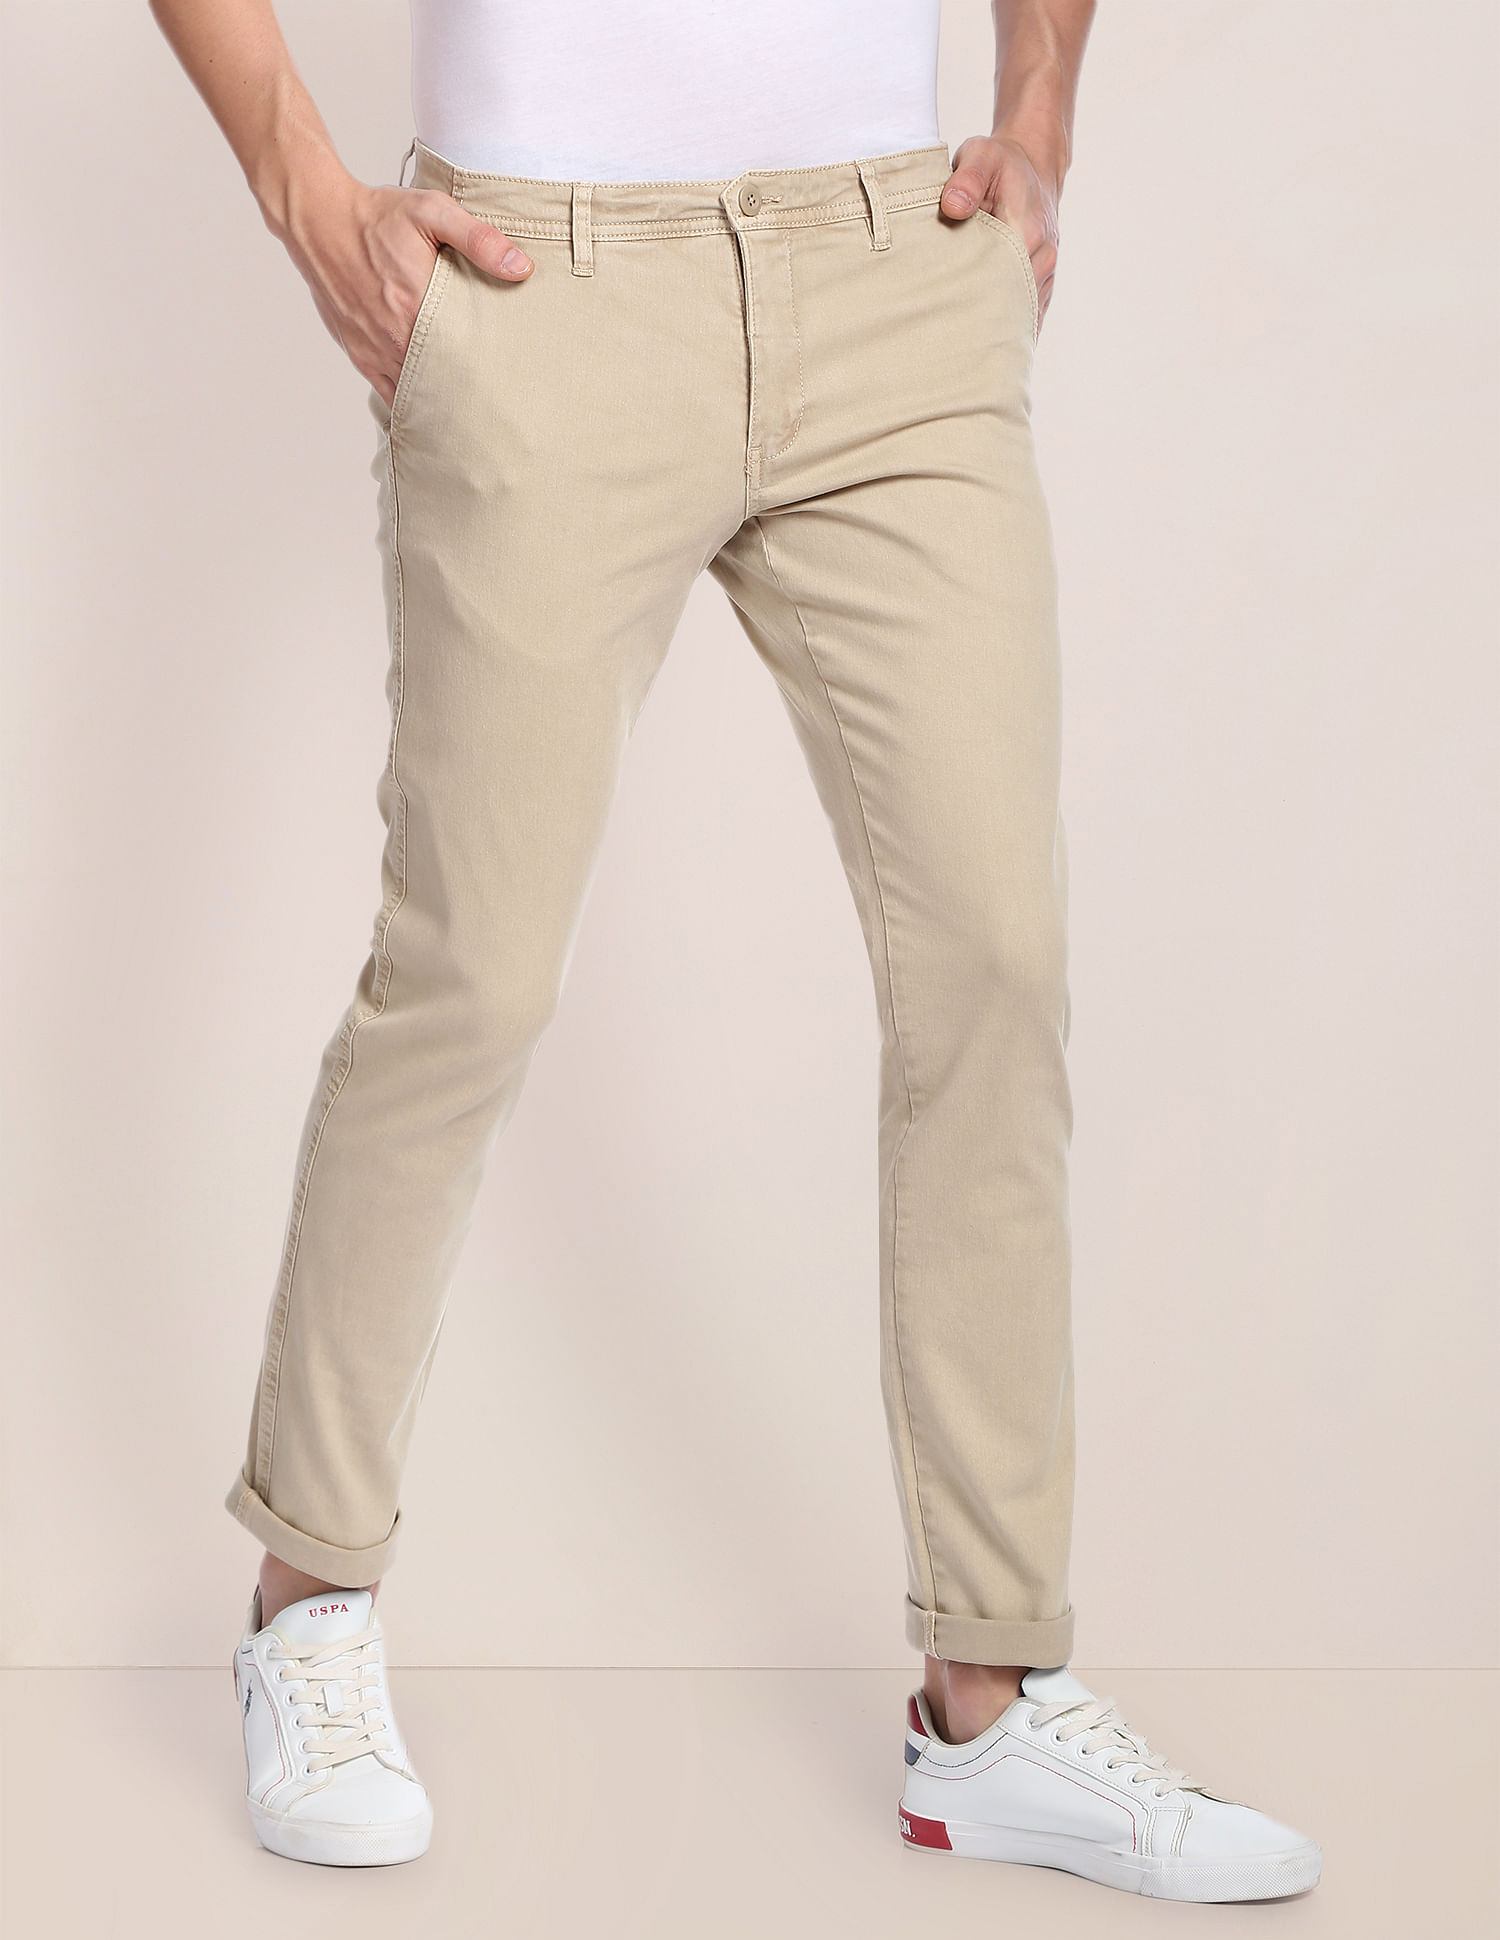 US POLO ASSN Boys Regular Fit Solid Trousers  Blue 1224 Months Buy US  POLO ASSN Boys Regular Fit Solid Trousers  Blue 1224 Months Online at  Best Price in India  Nykaa